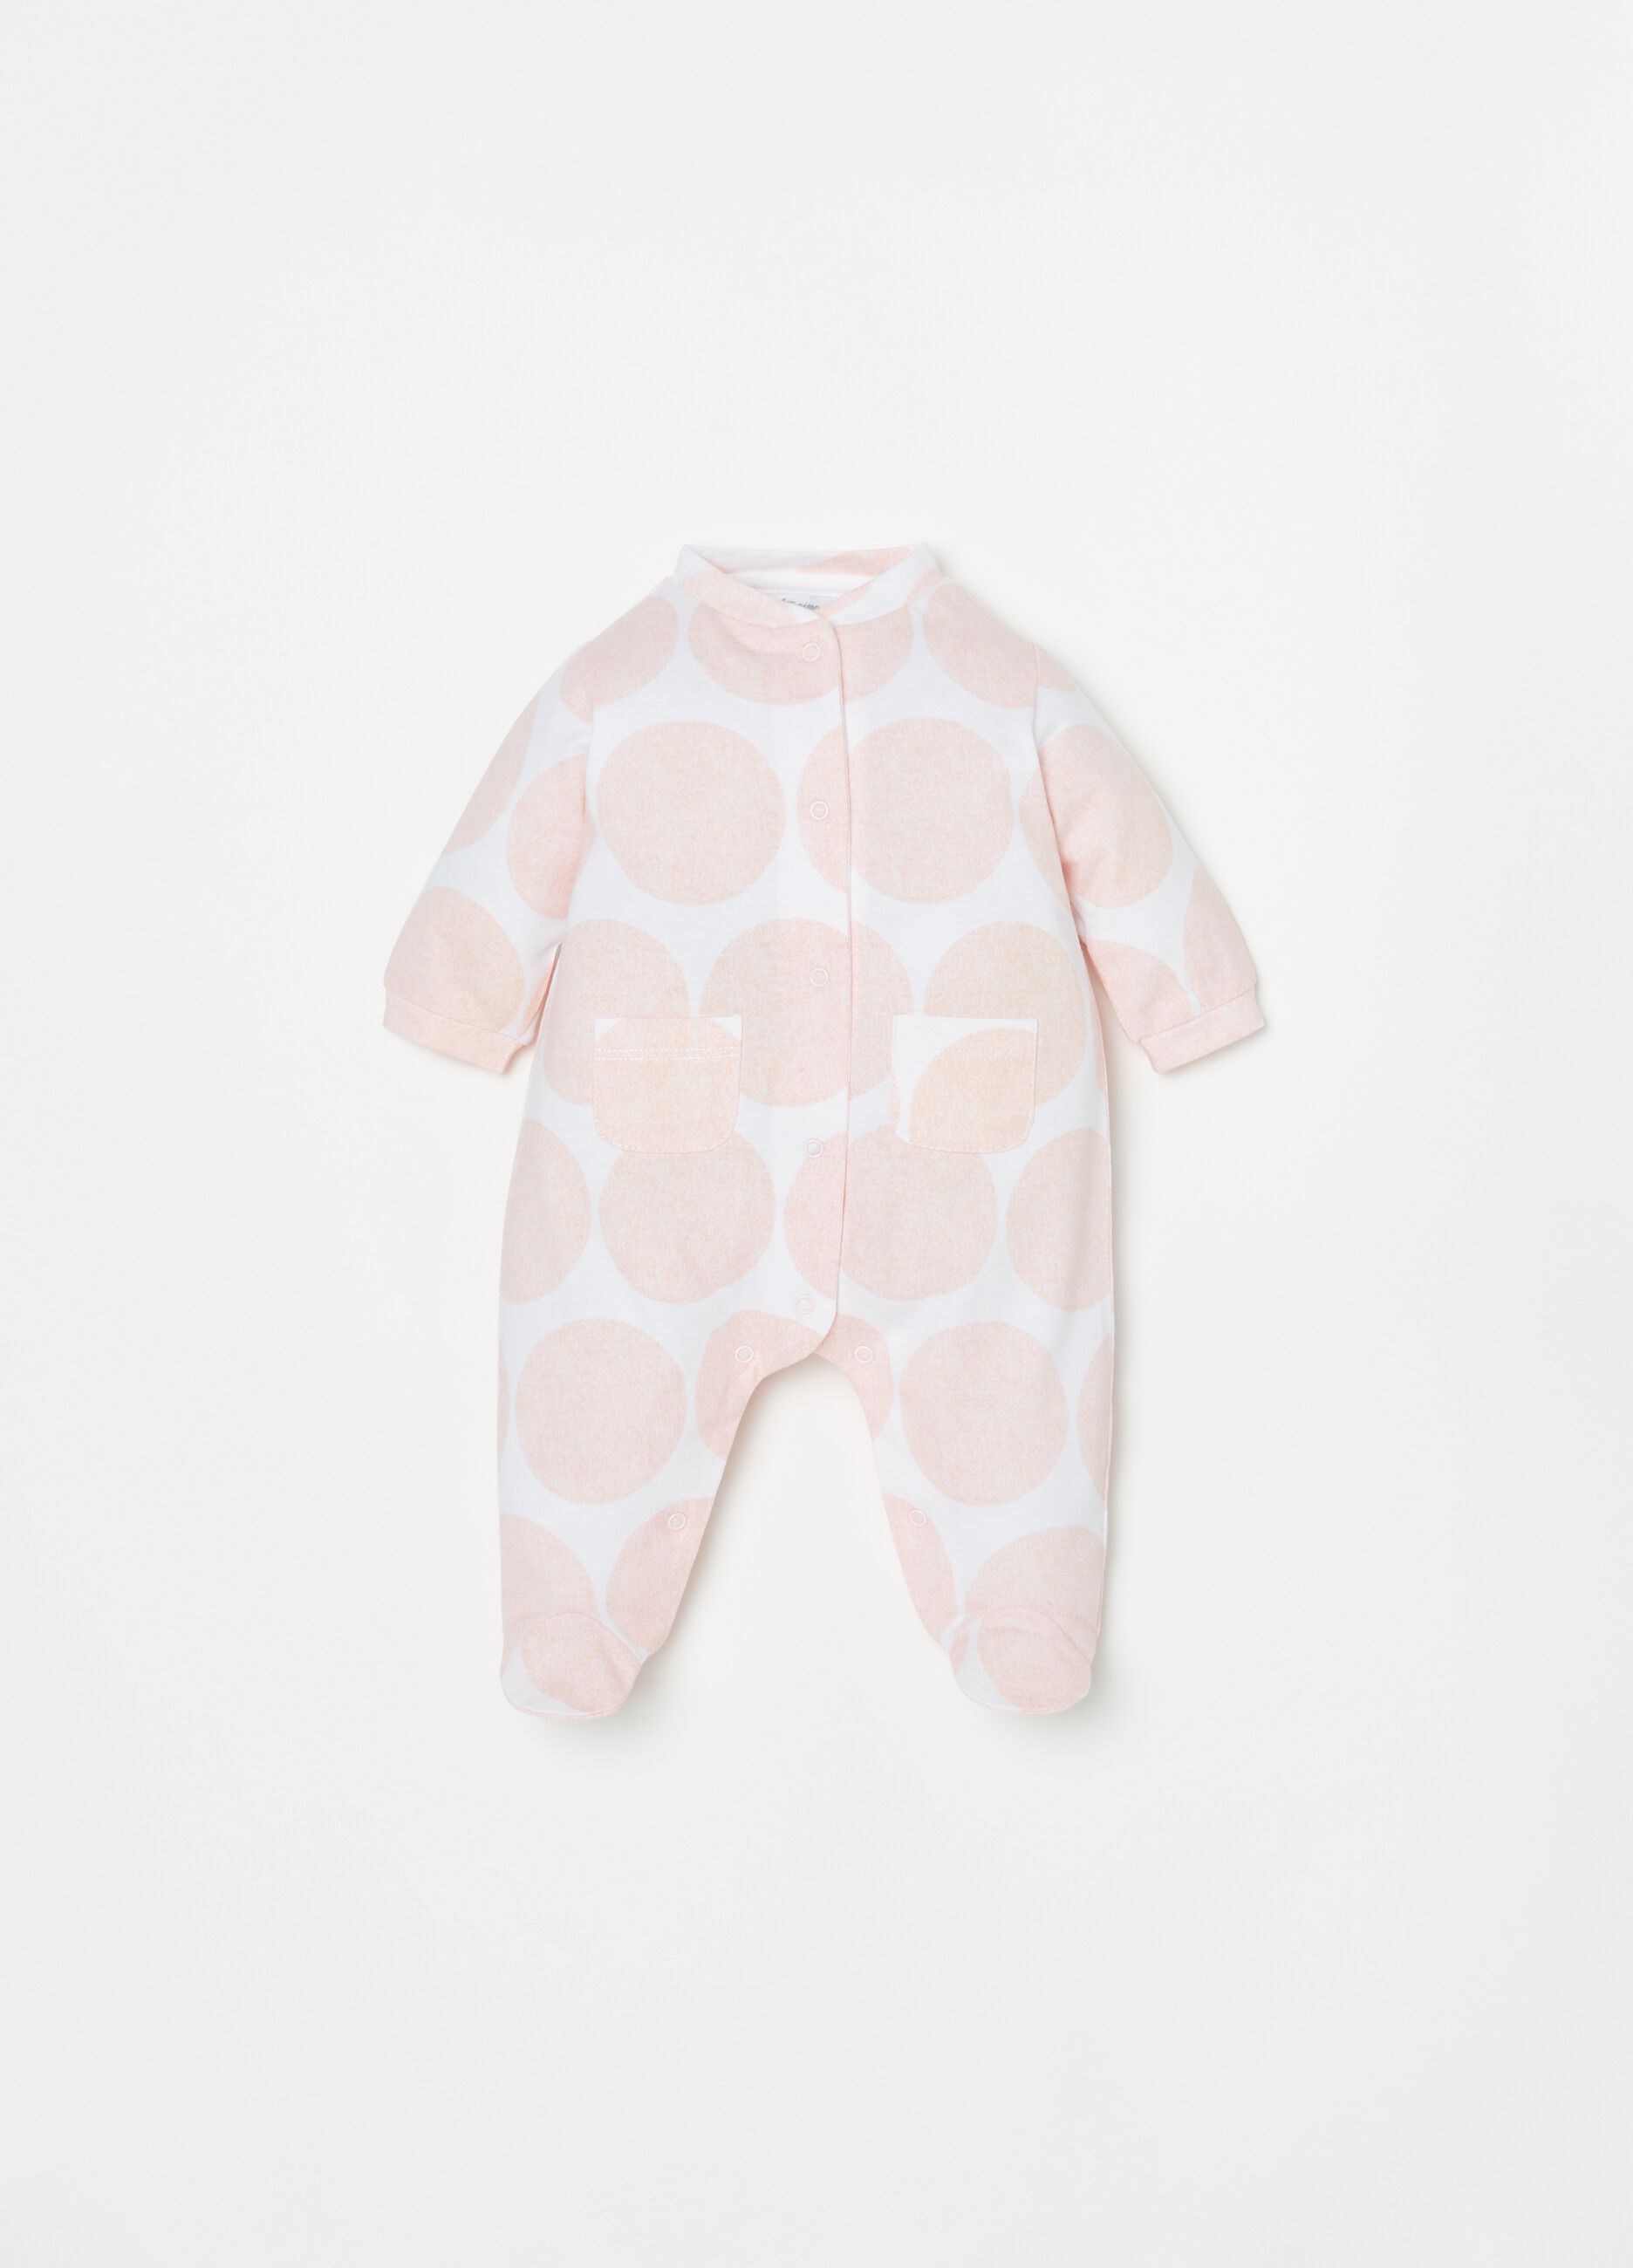 Cotton onesie with feet and maxi polka dots pattern